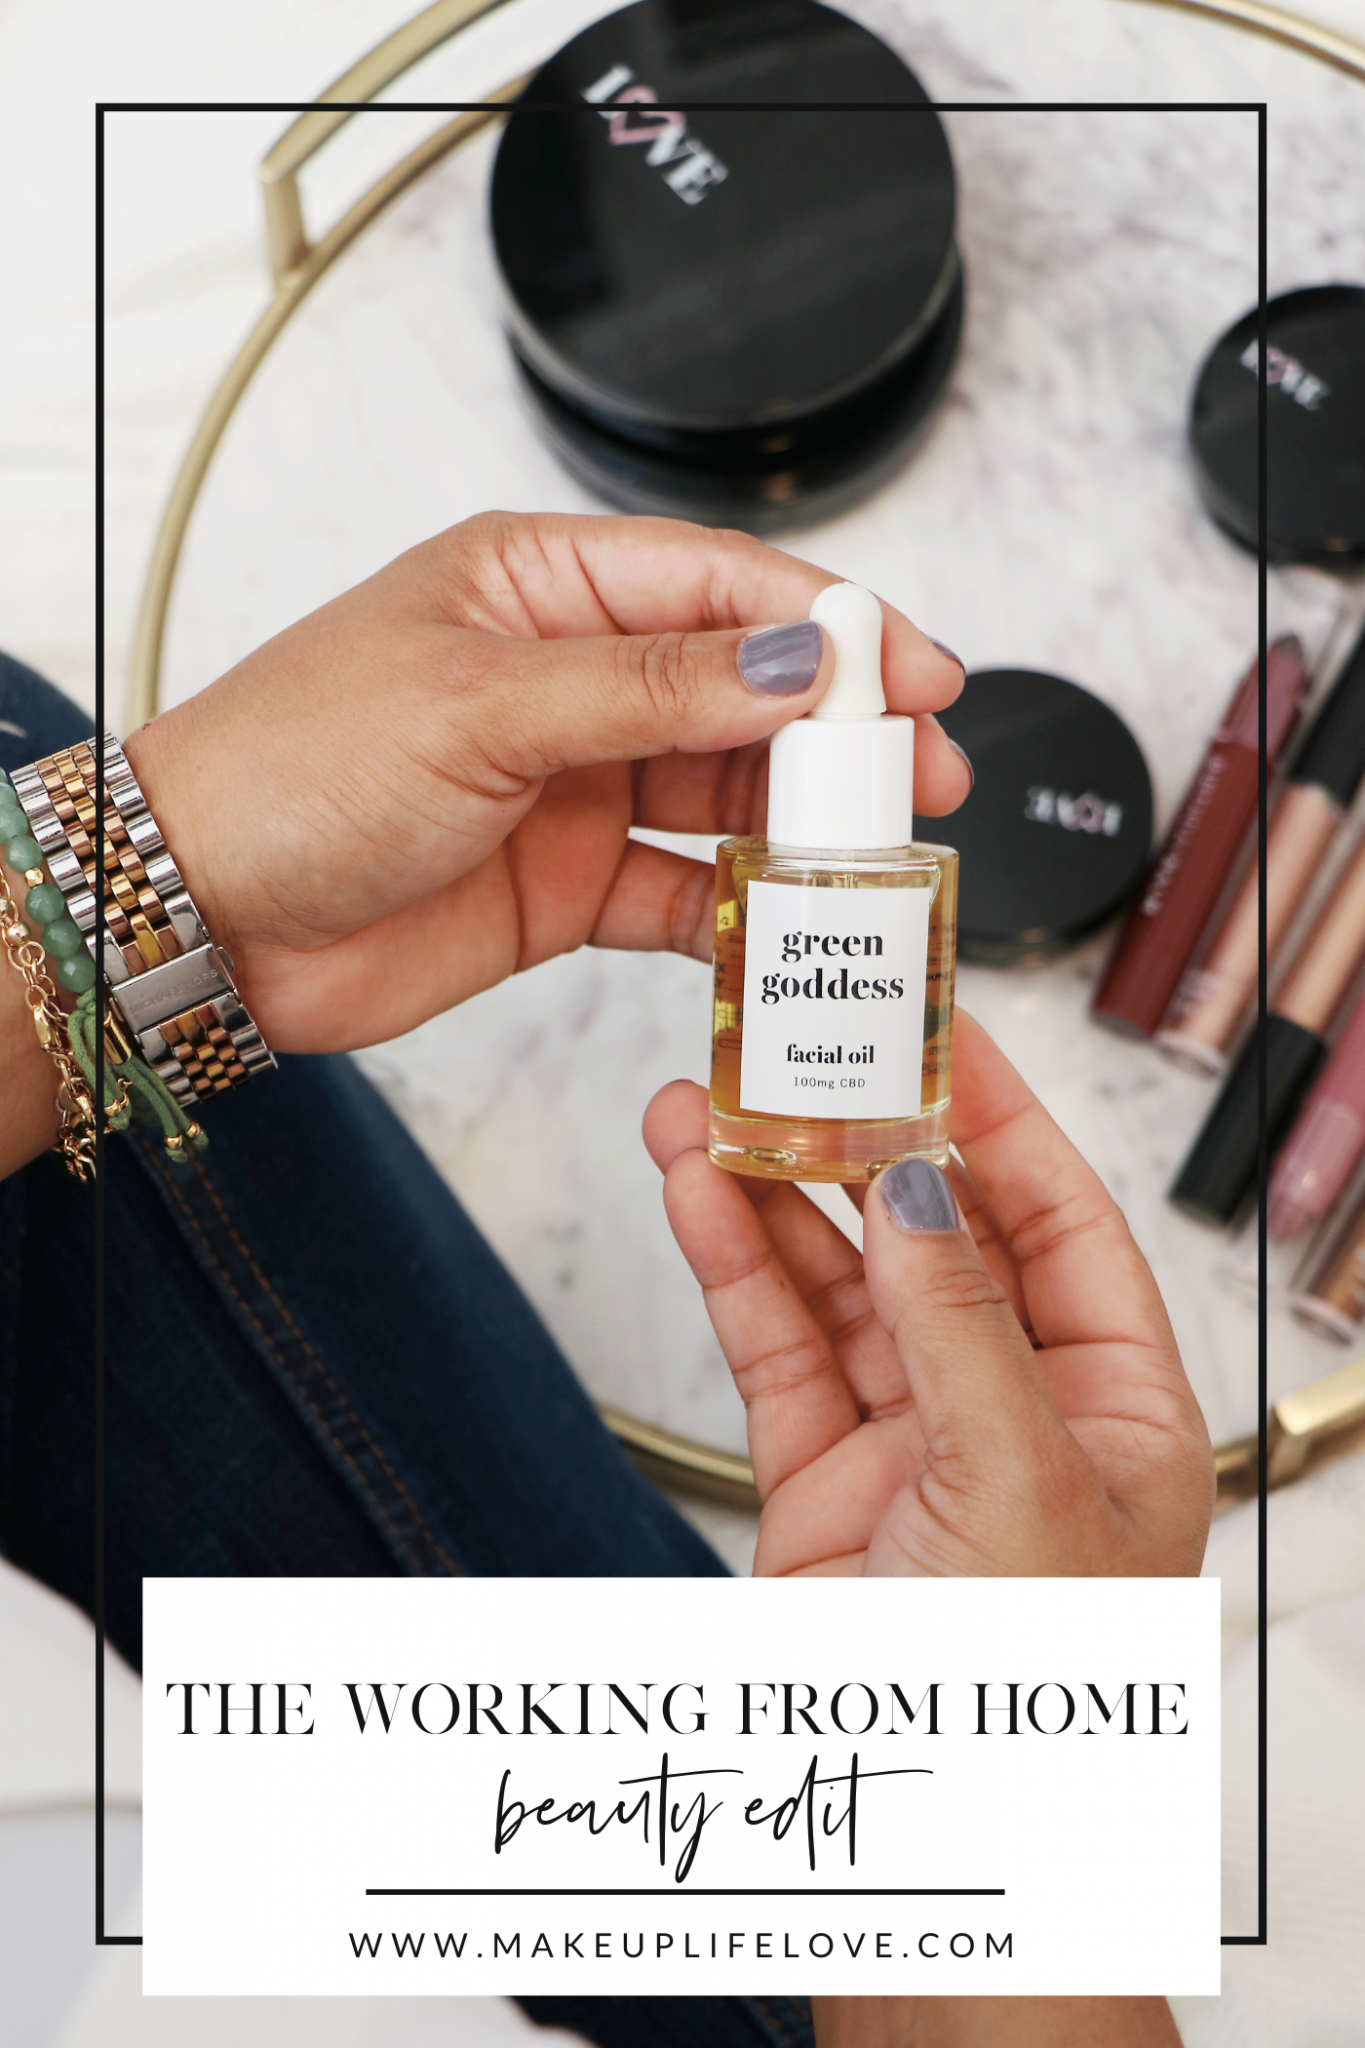 Working from home just got easier. Need help upping your zoom meeting game? Los Angeles blogger is sharing her working from home beauty edit HERE!